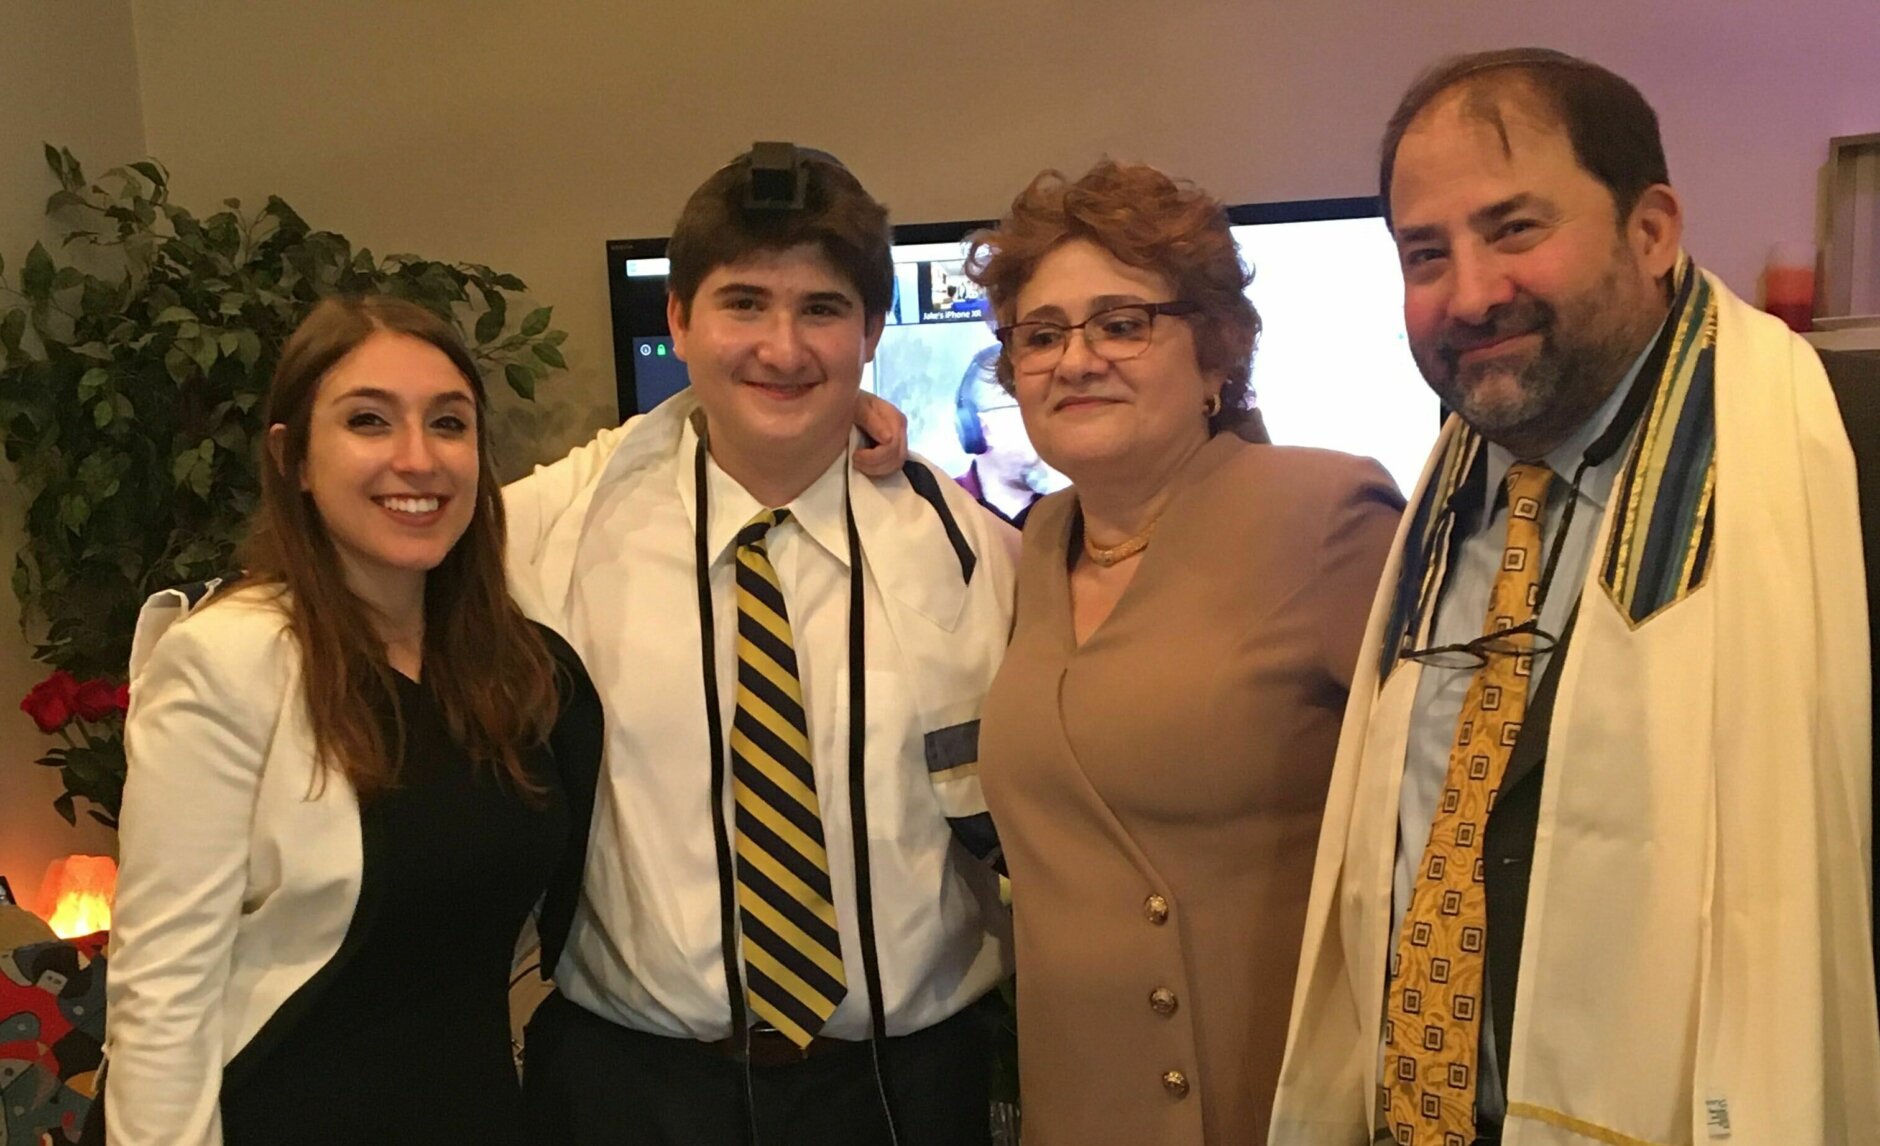 <p>The Gordons hope to travel to Israel next year to see some of the places they had hoped to visit this month.</p>
<p>As he reflected on his Bar-Mitzvah, Jake said he’s grateful for the technology and the joy that came from it.</p>
<p>“During this negative time, it was nice to have some positivity with all the family and friends that were supporting me and cheering me on,” he said.</p>
